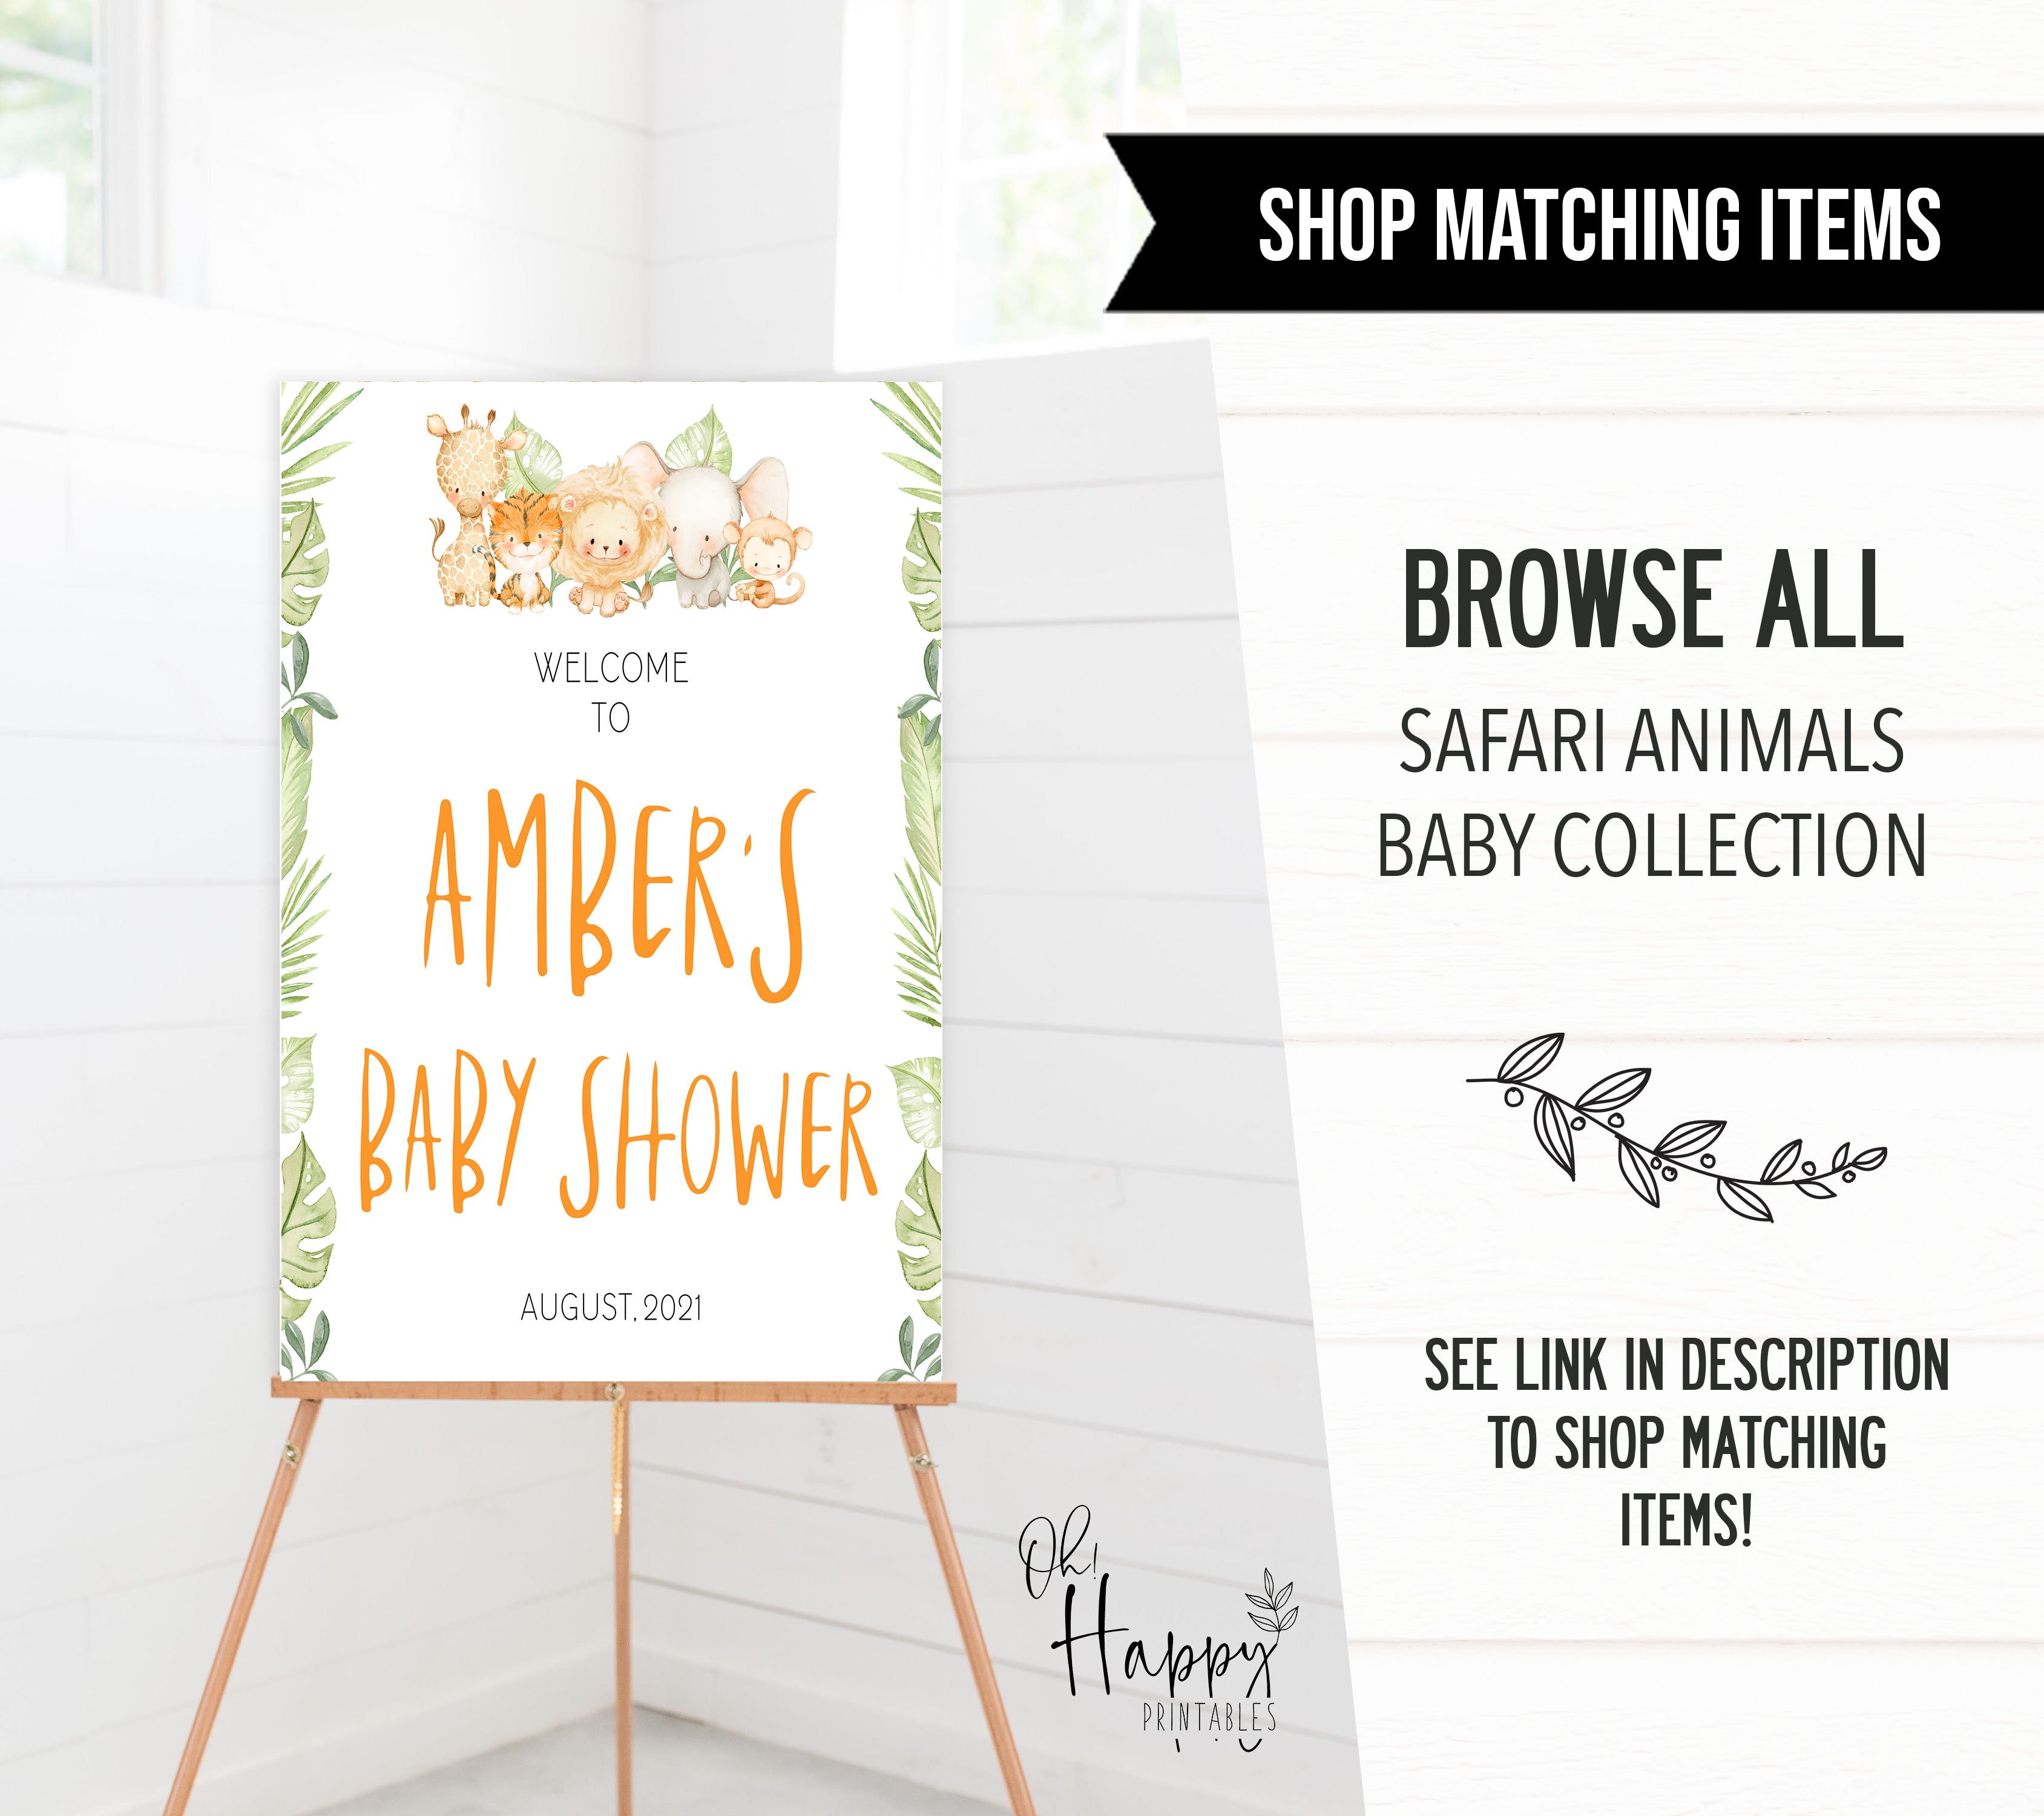 prayers for the baby game, Printable baby shower games, safari animals baby games, baby shower games, fun baby shower ideas, top baby shower ideas, safari animals baby shower, baby shower games, fun baby shower ideas